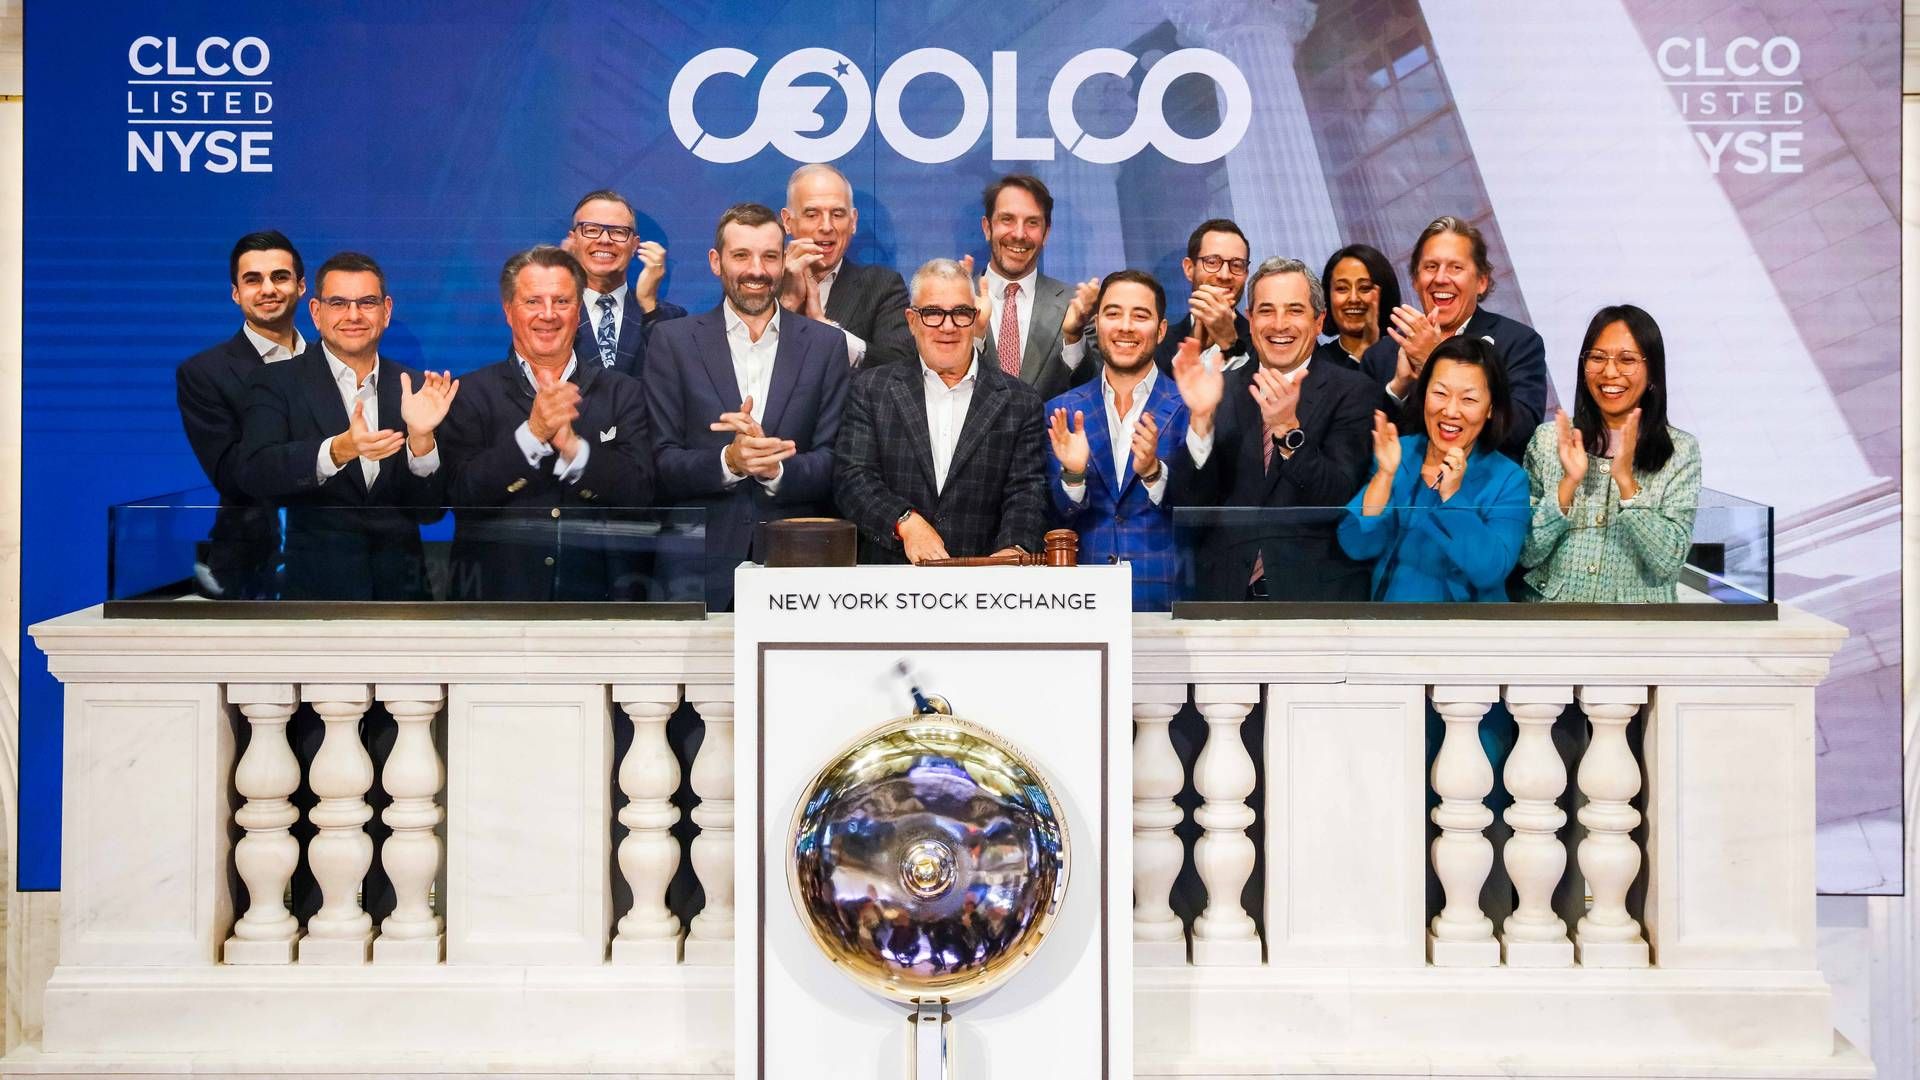 Idan Ofer rings the Closing Bell at the New York Stock Exchange in March this year, marking the IPO of Cool Company. | Photo: Pr-foto